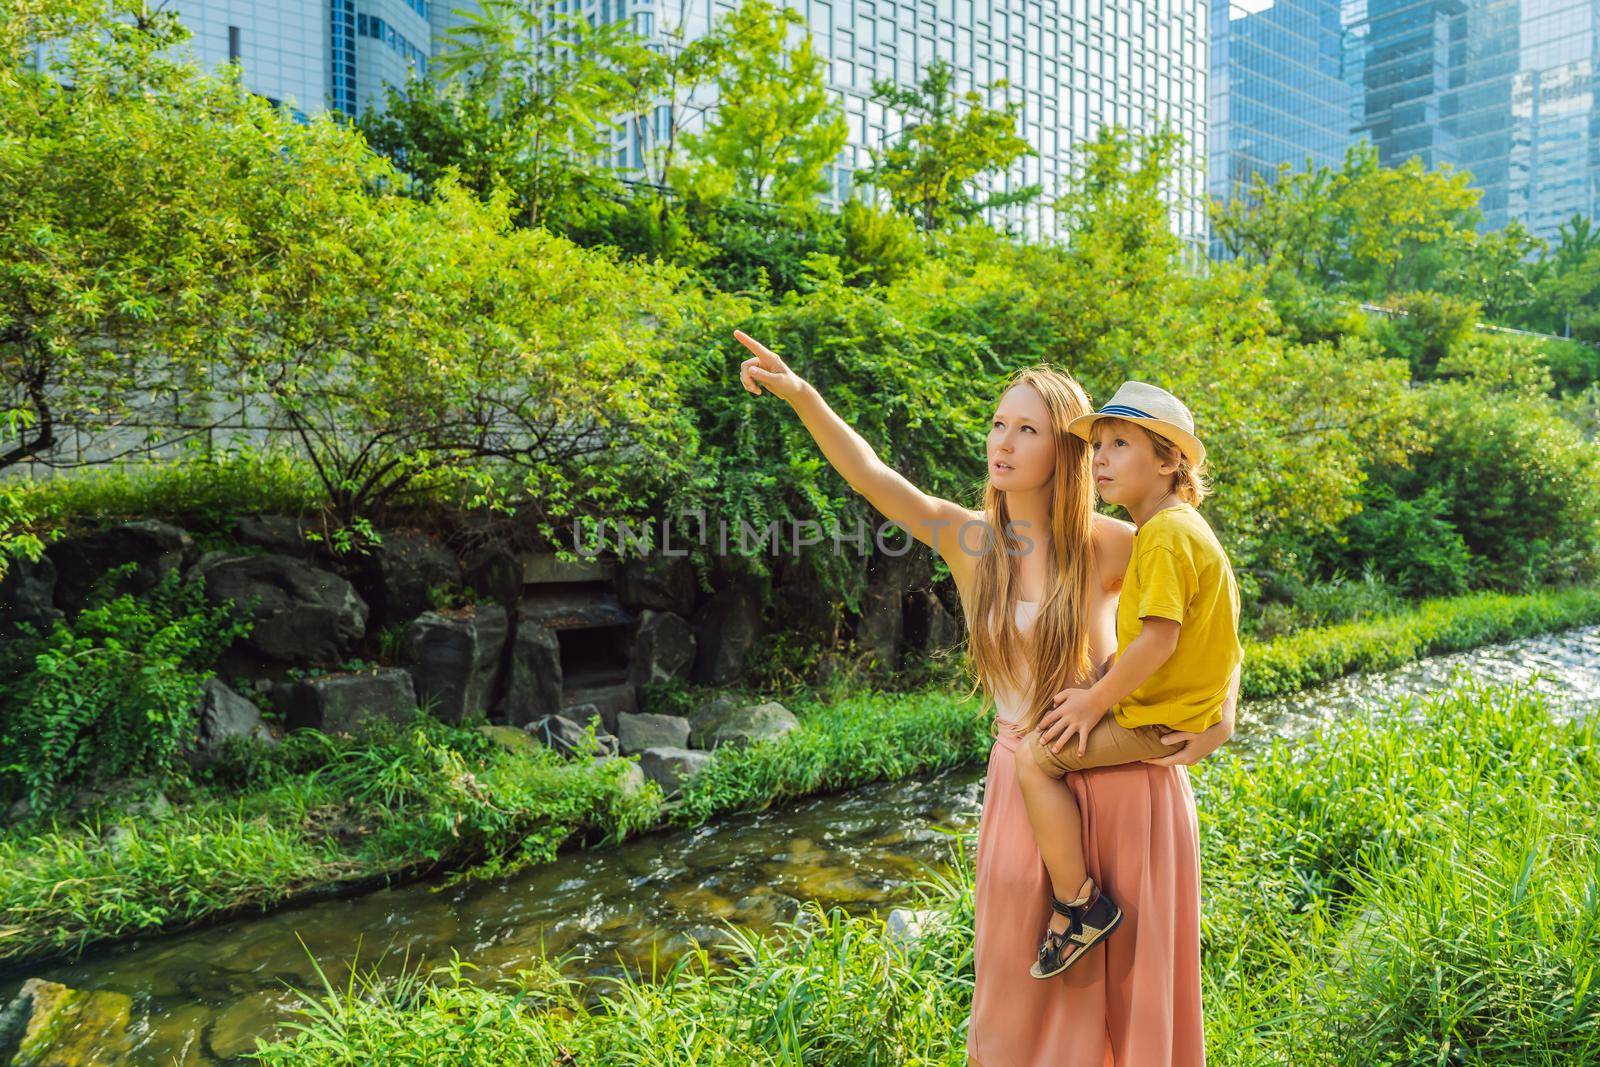 Mom and son tourists in Cheonggyecheon stream in Seoul, Korea. Cheonggyecheon stream is the result of a massive urban renewal project. Travel to Korea Concept.